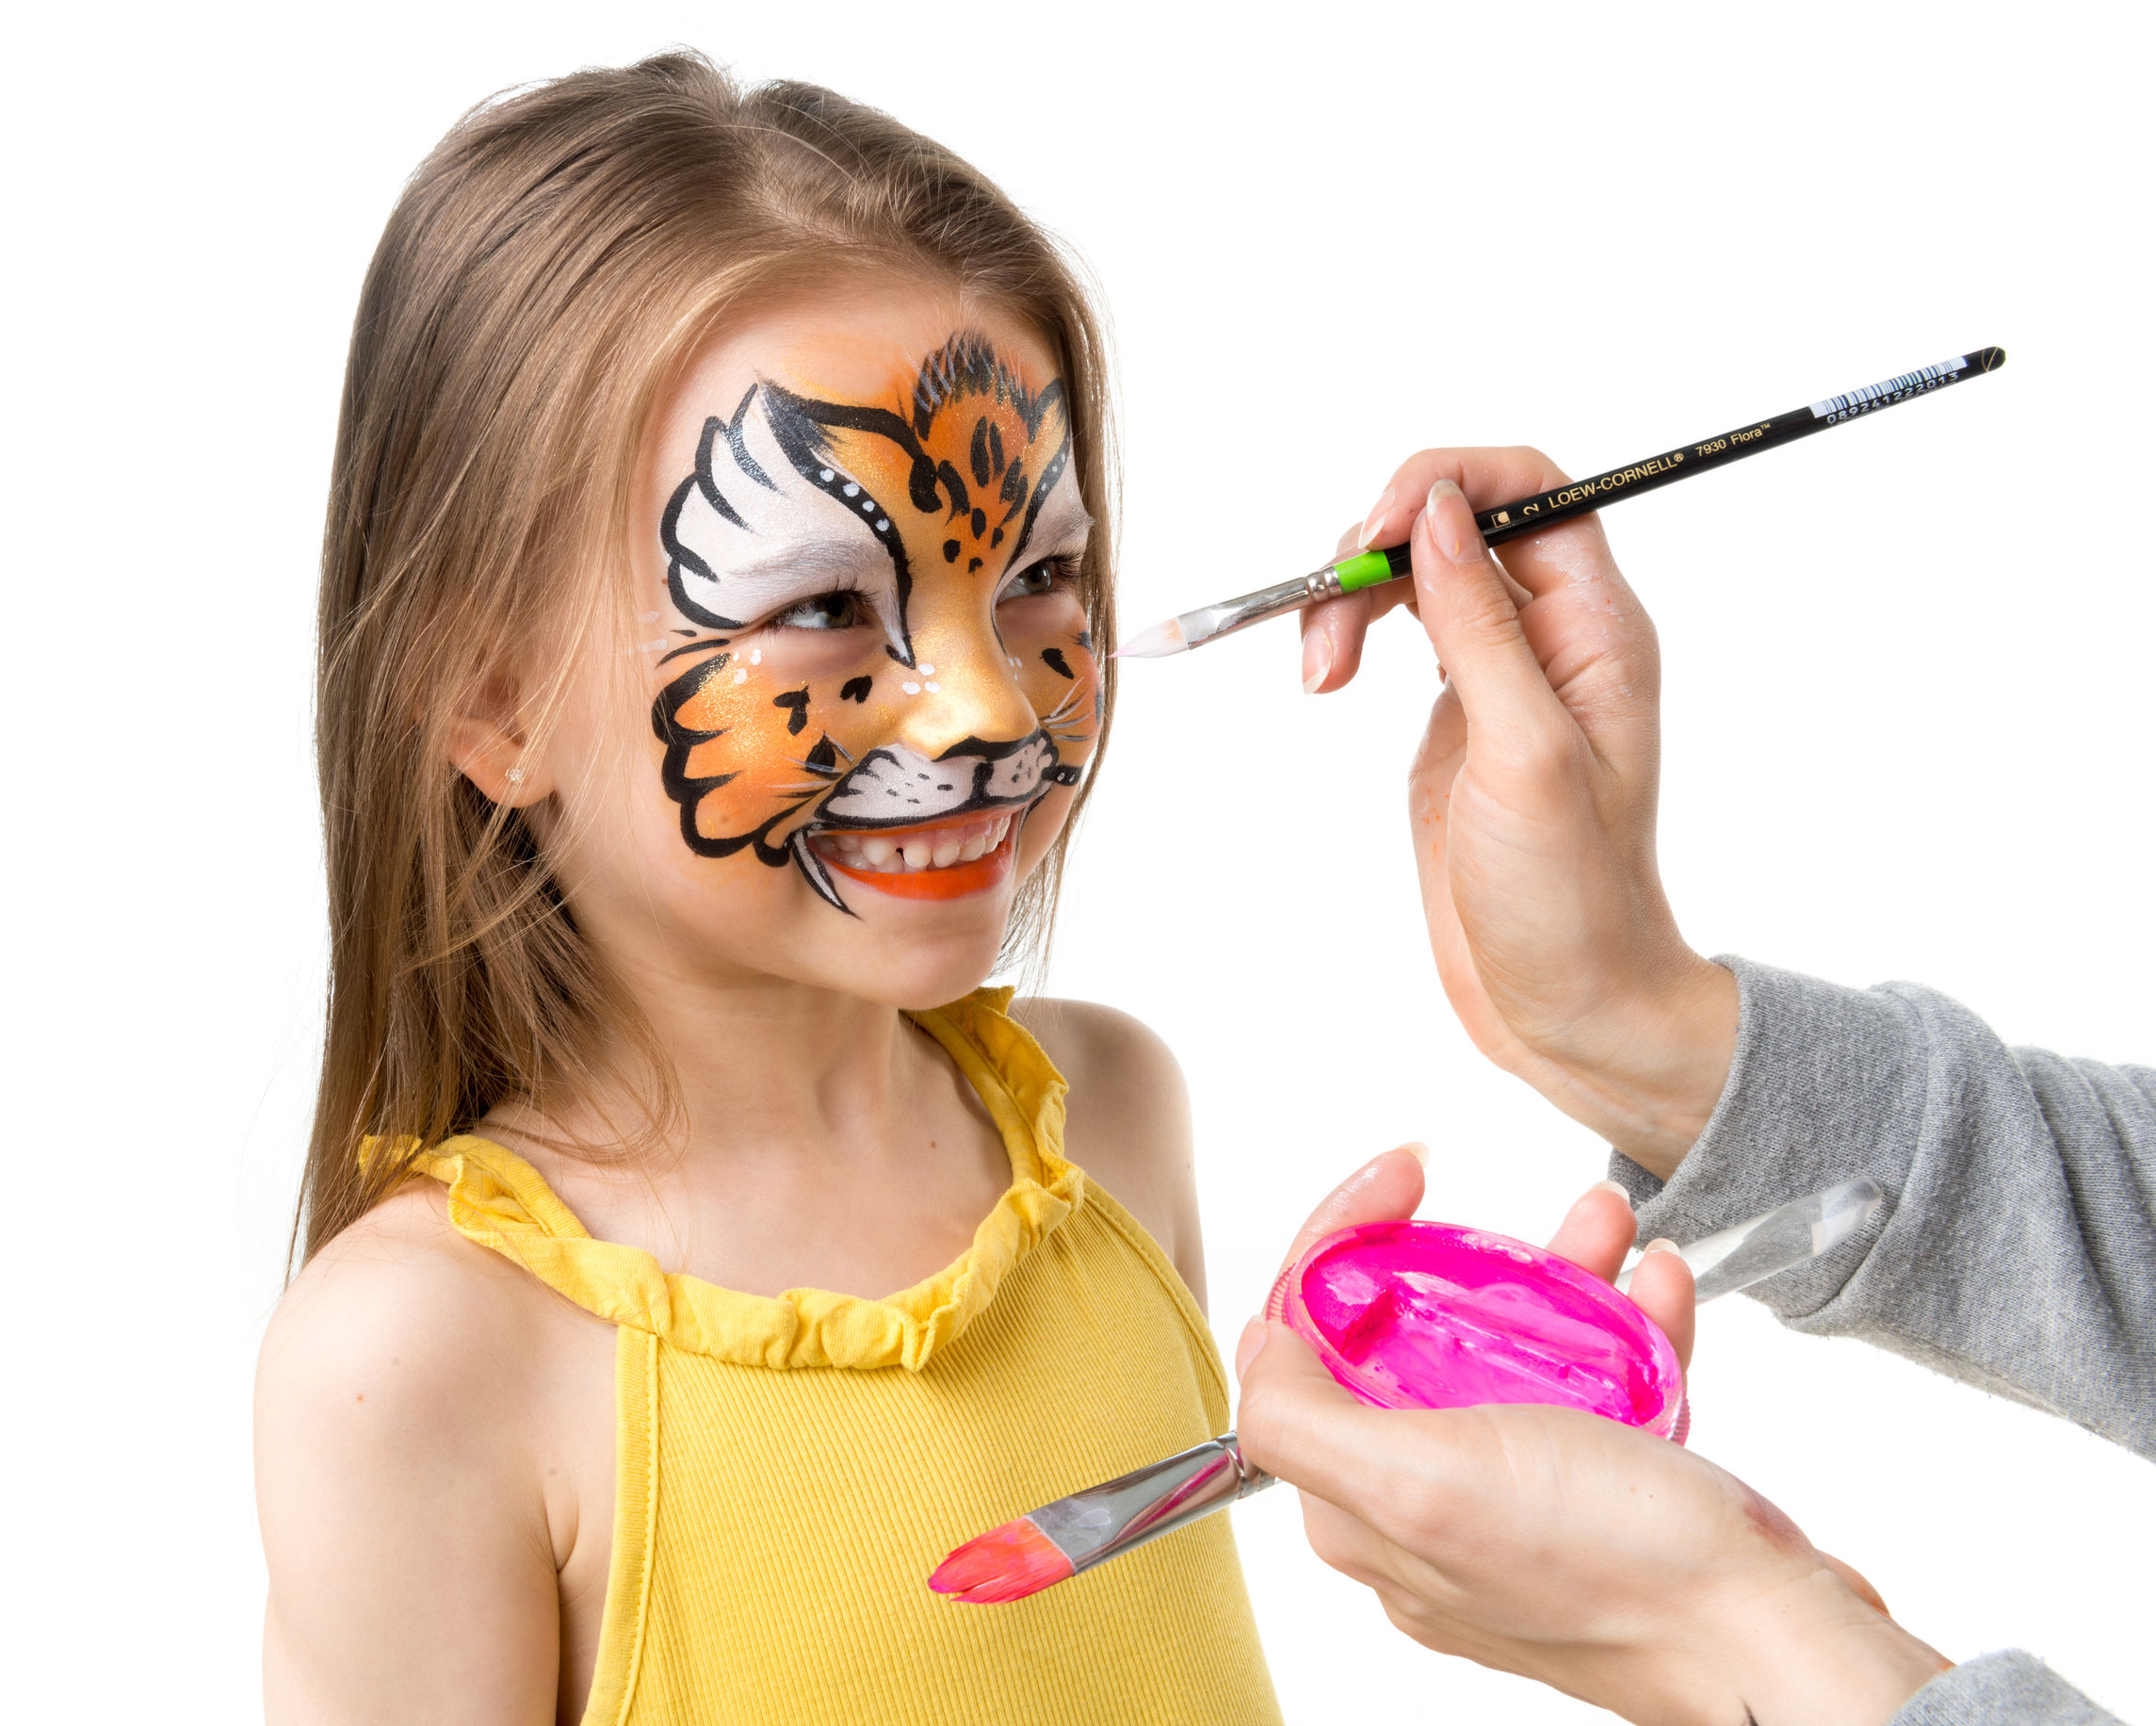 66160250 – joyful little girl getting her face painted like tiger by artist